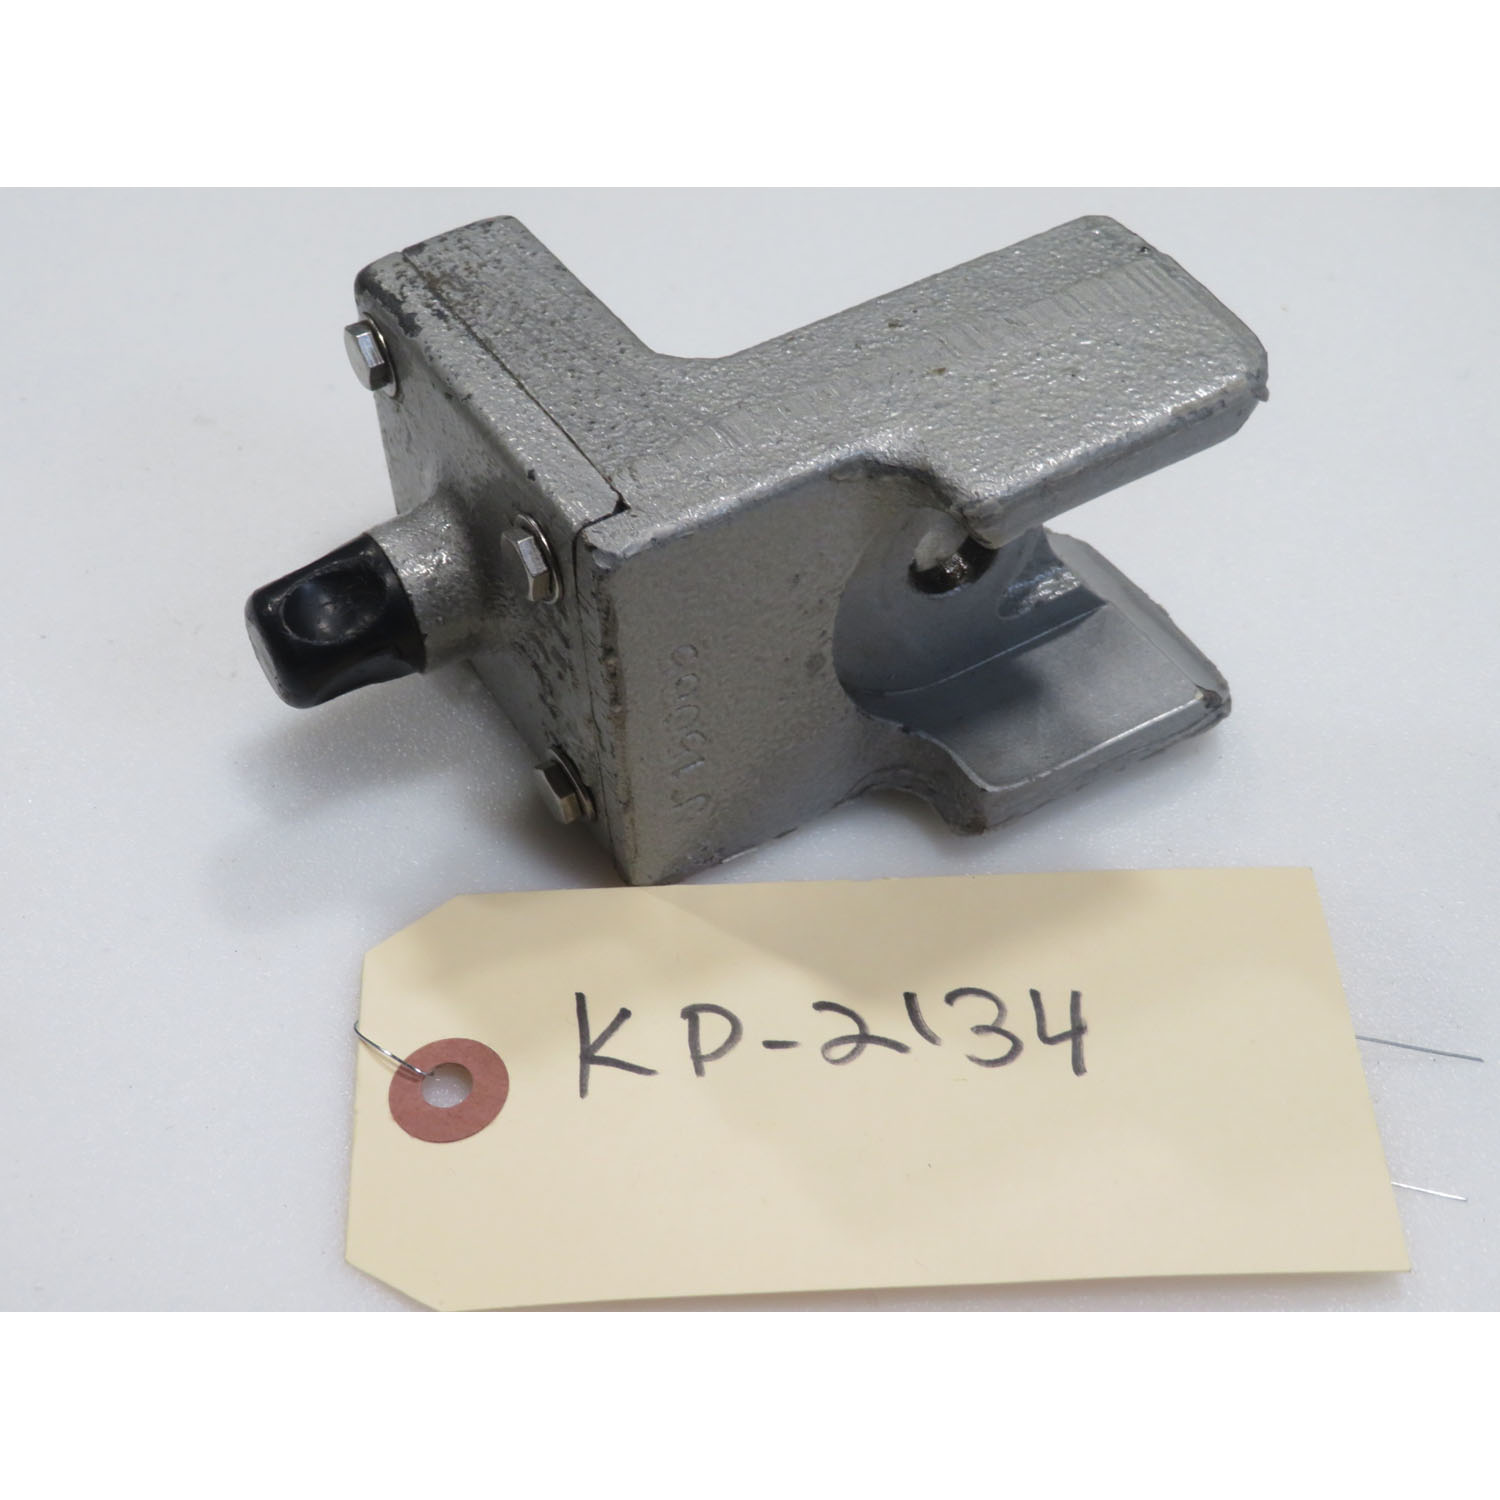 Hobart A200 Mixer Bowl Scraper Bracket 00-435648-00002, Used Excellent Condition image 1